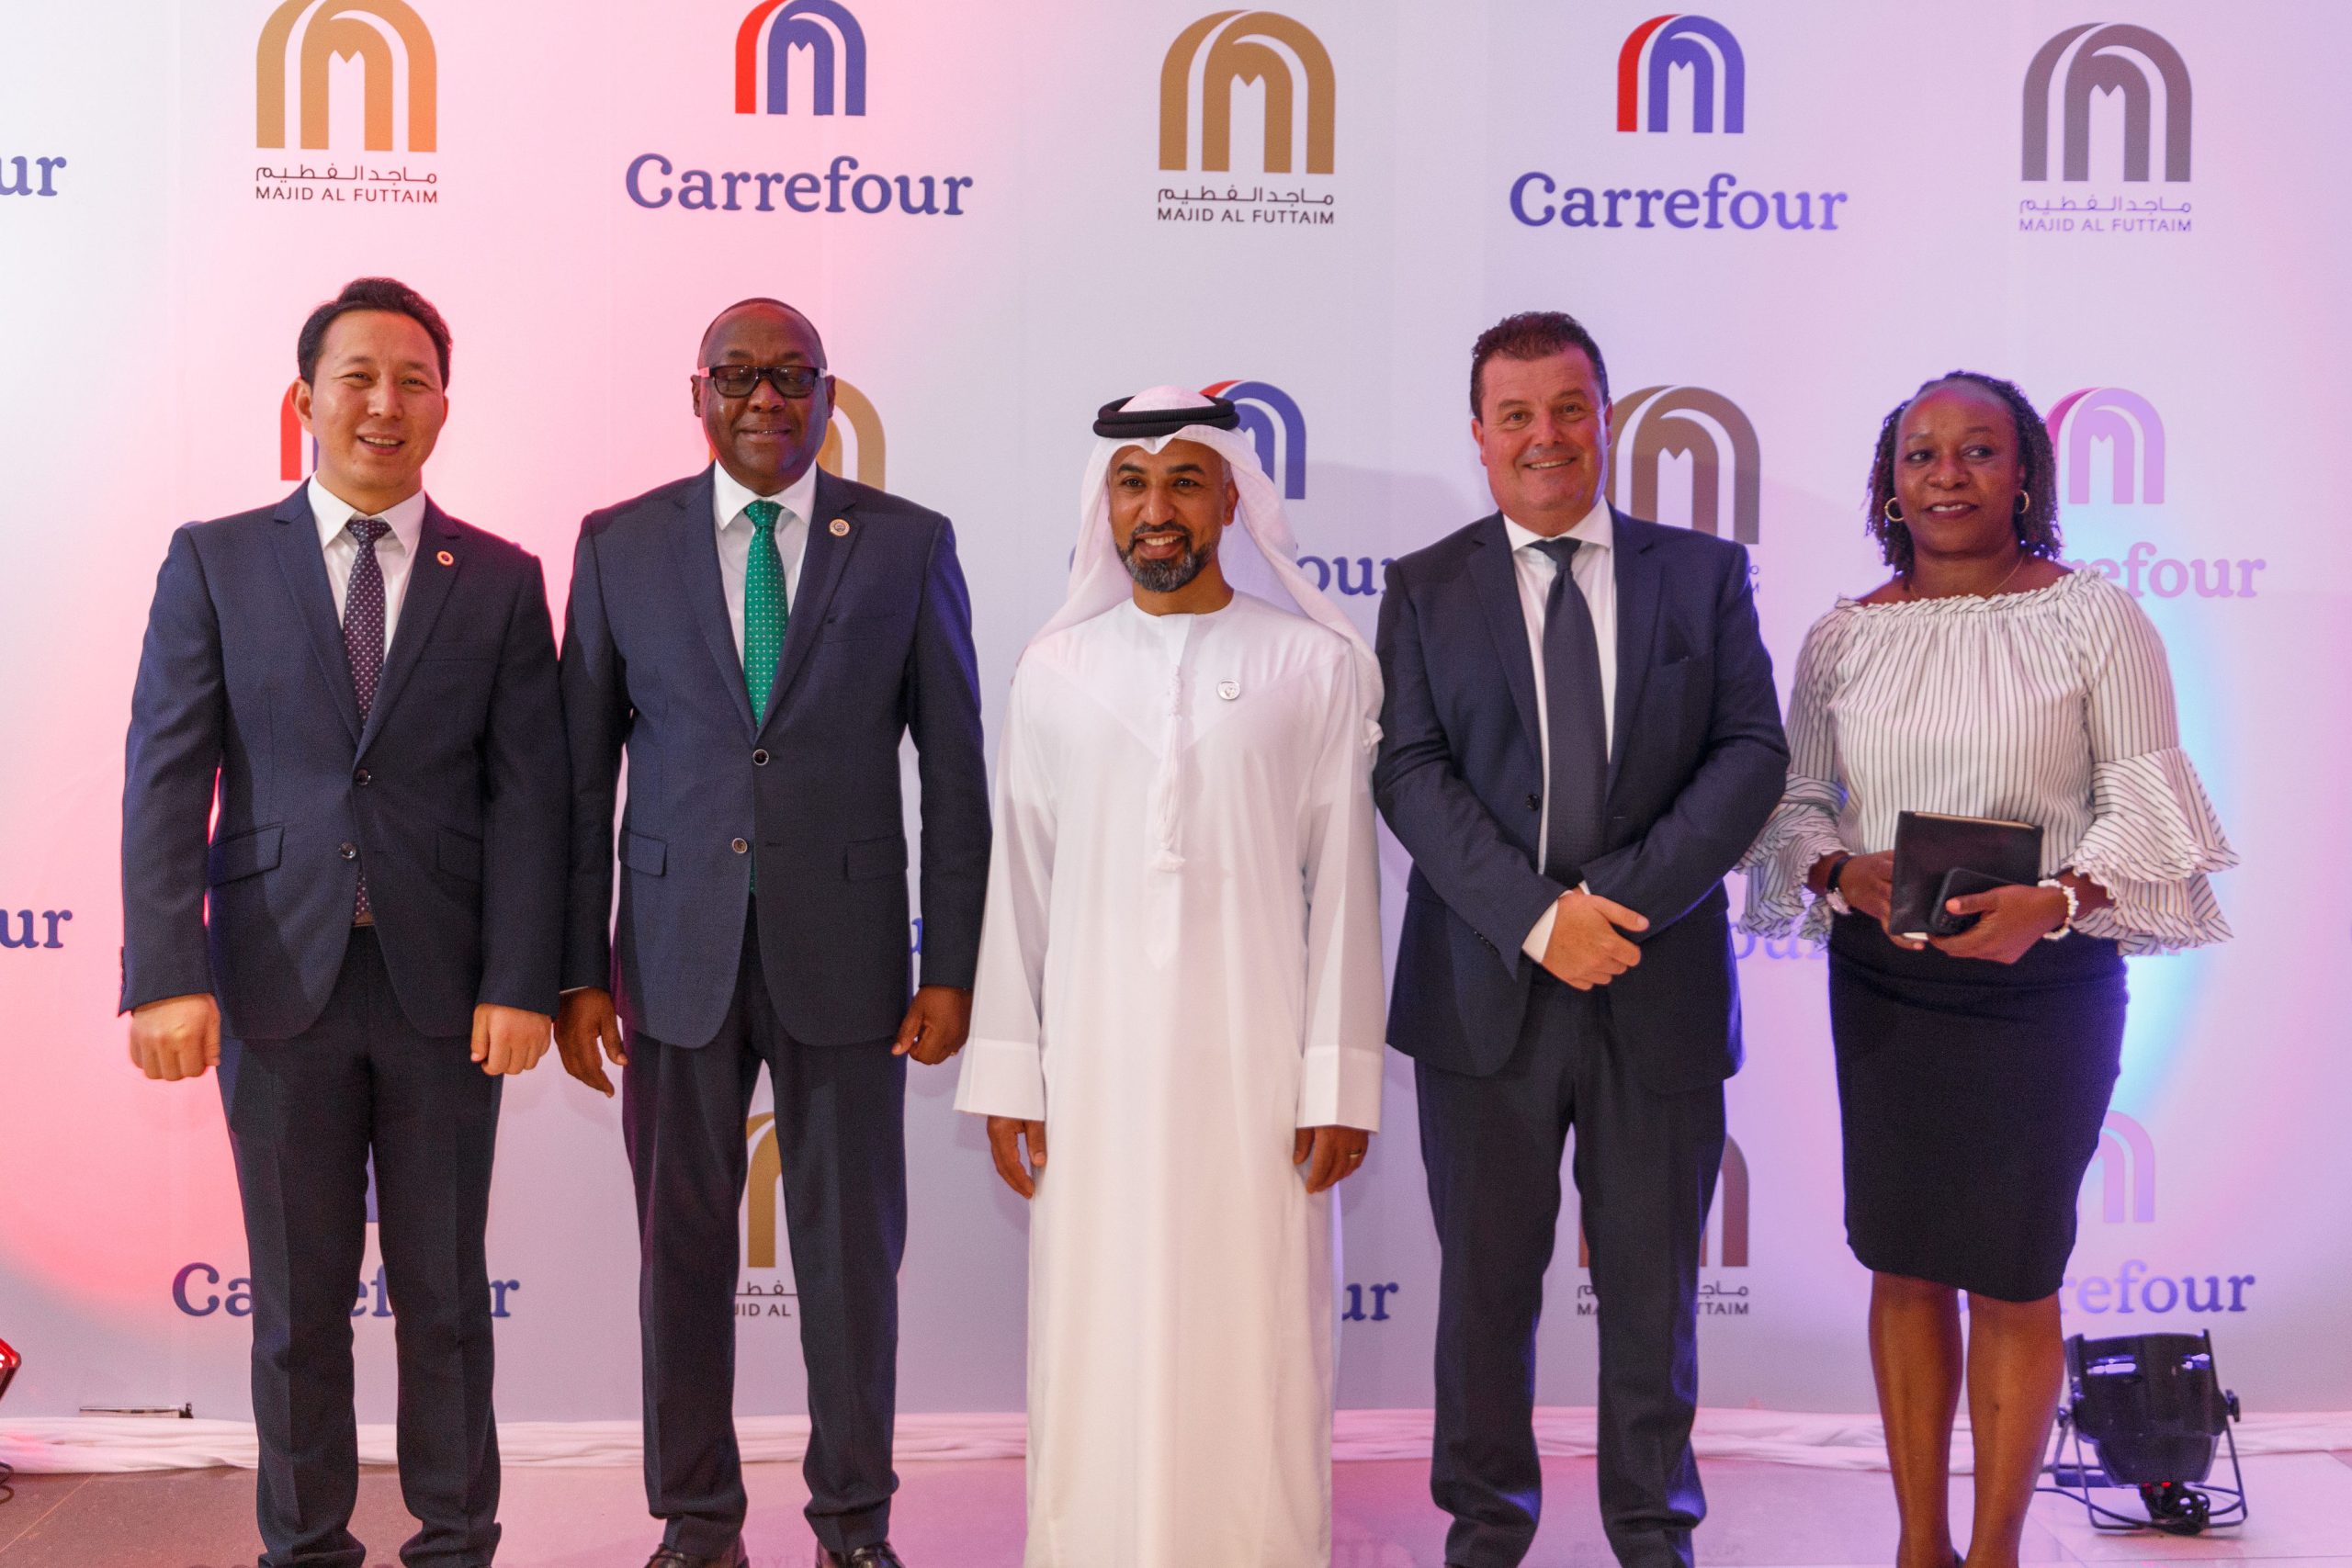 Majid Al Futtaim, which owns the exclusive rights to operate Carrefour in Kenya, has announced the opening of its 23rd store at GTC Mall in Westlands, Nairobi.